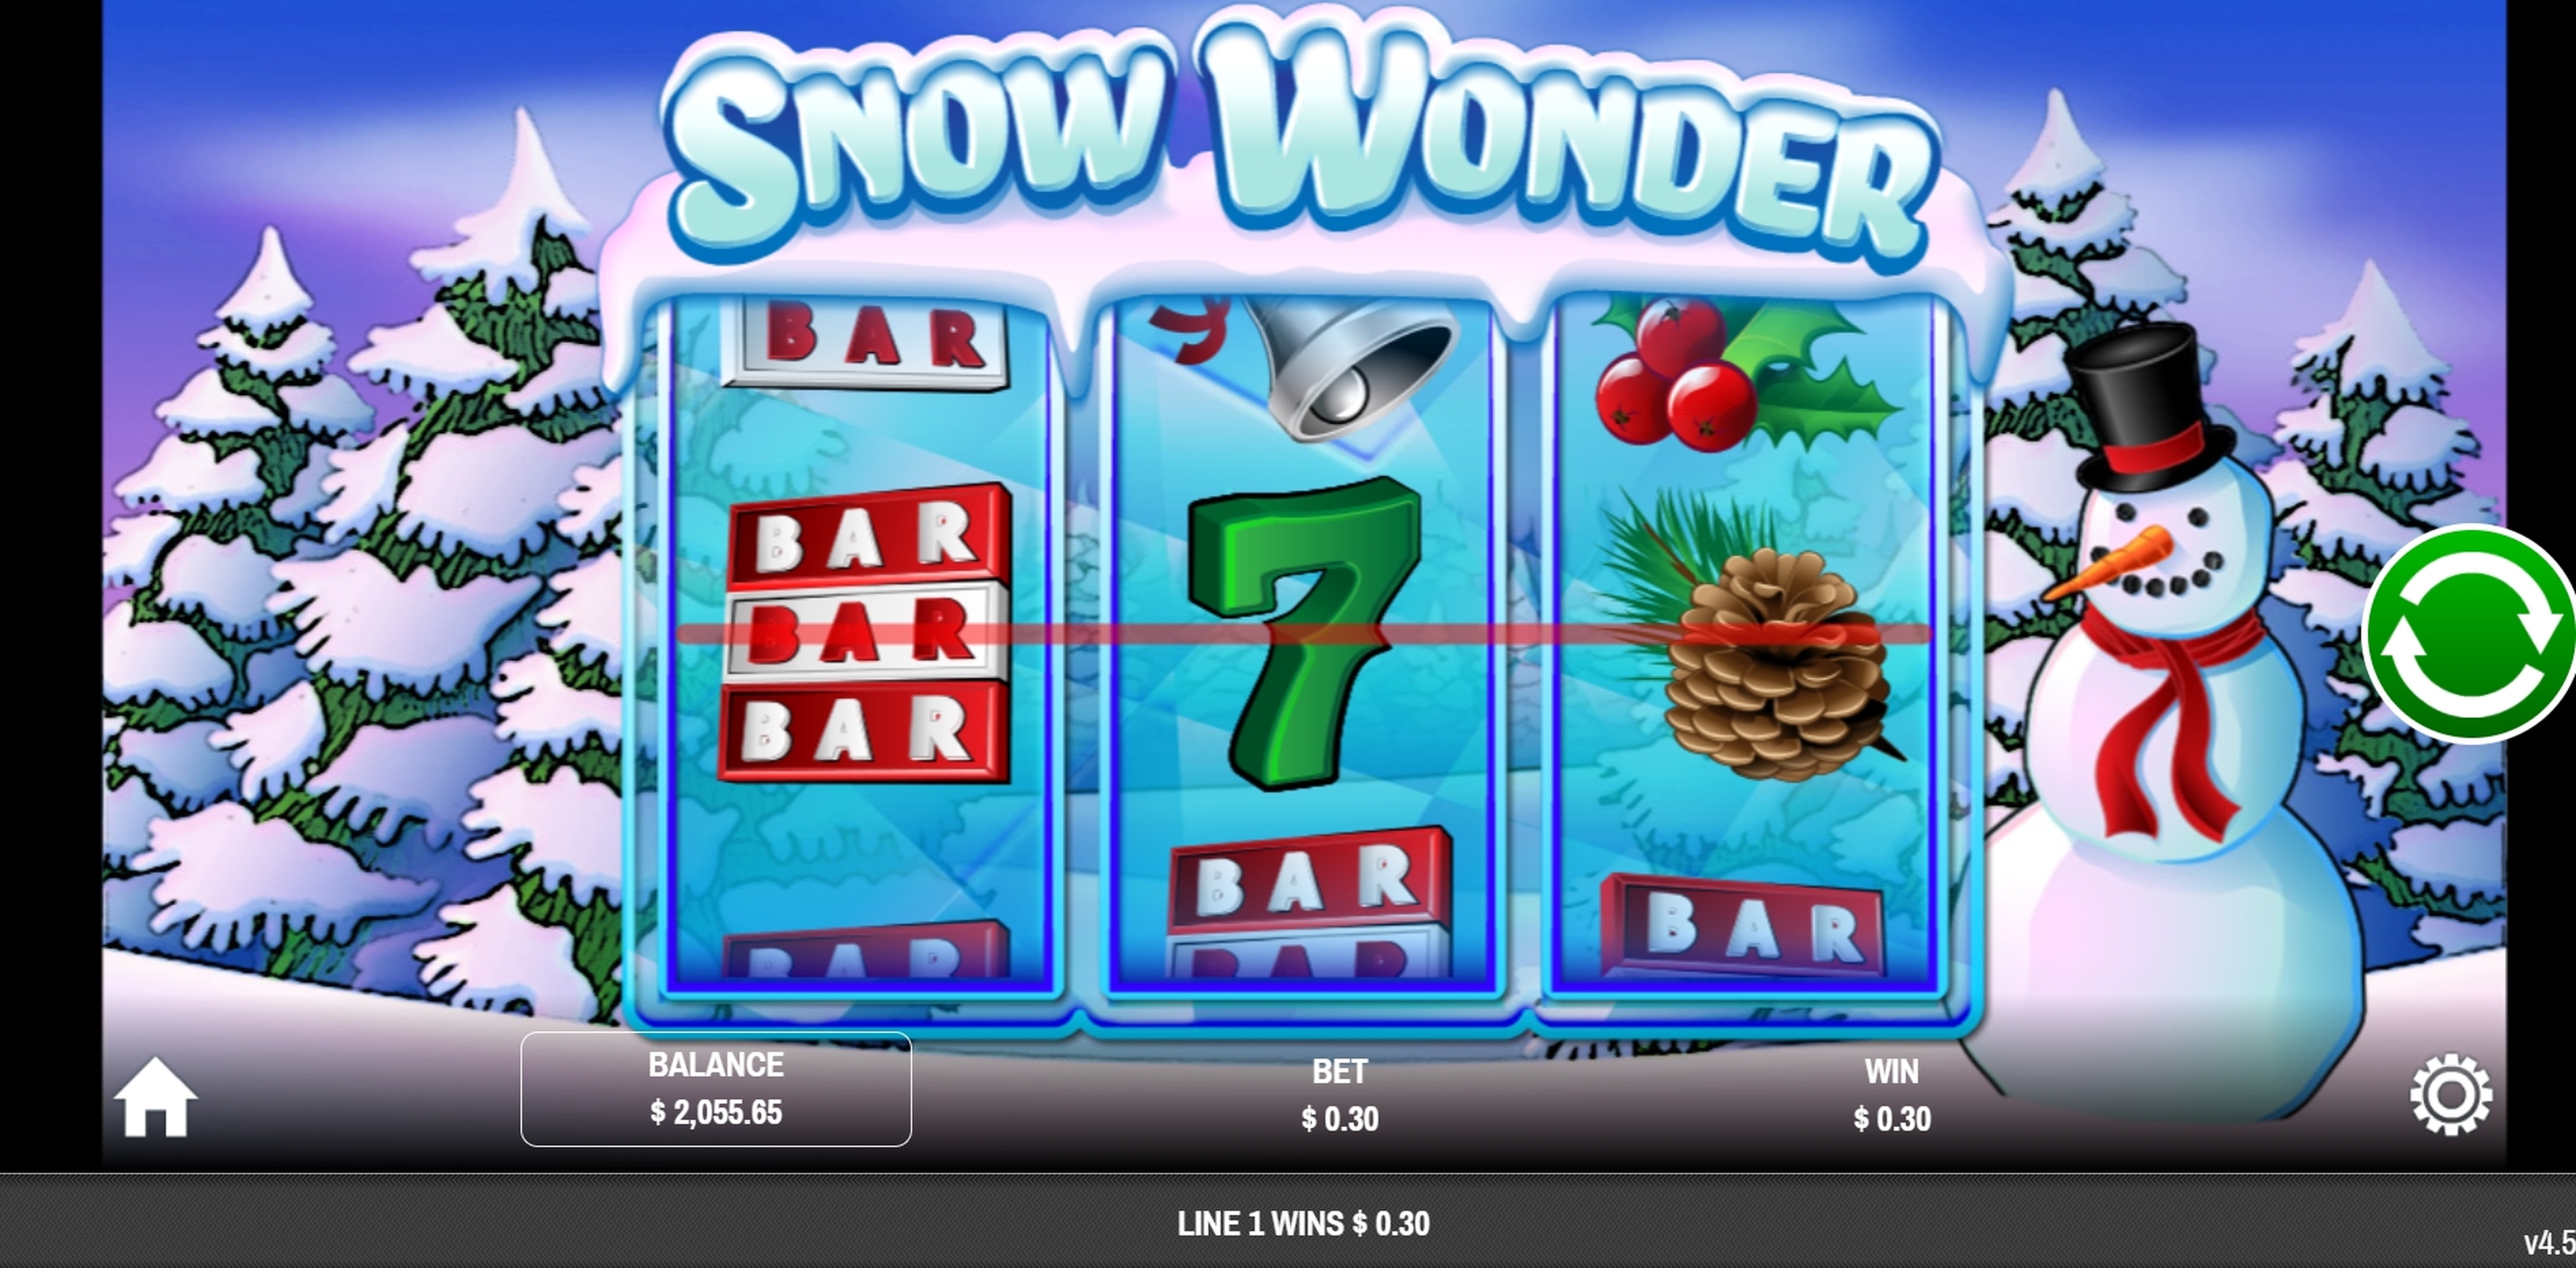 Win Money in Snow Wonder Free Slot Game by Rival